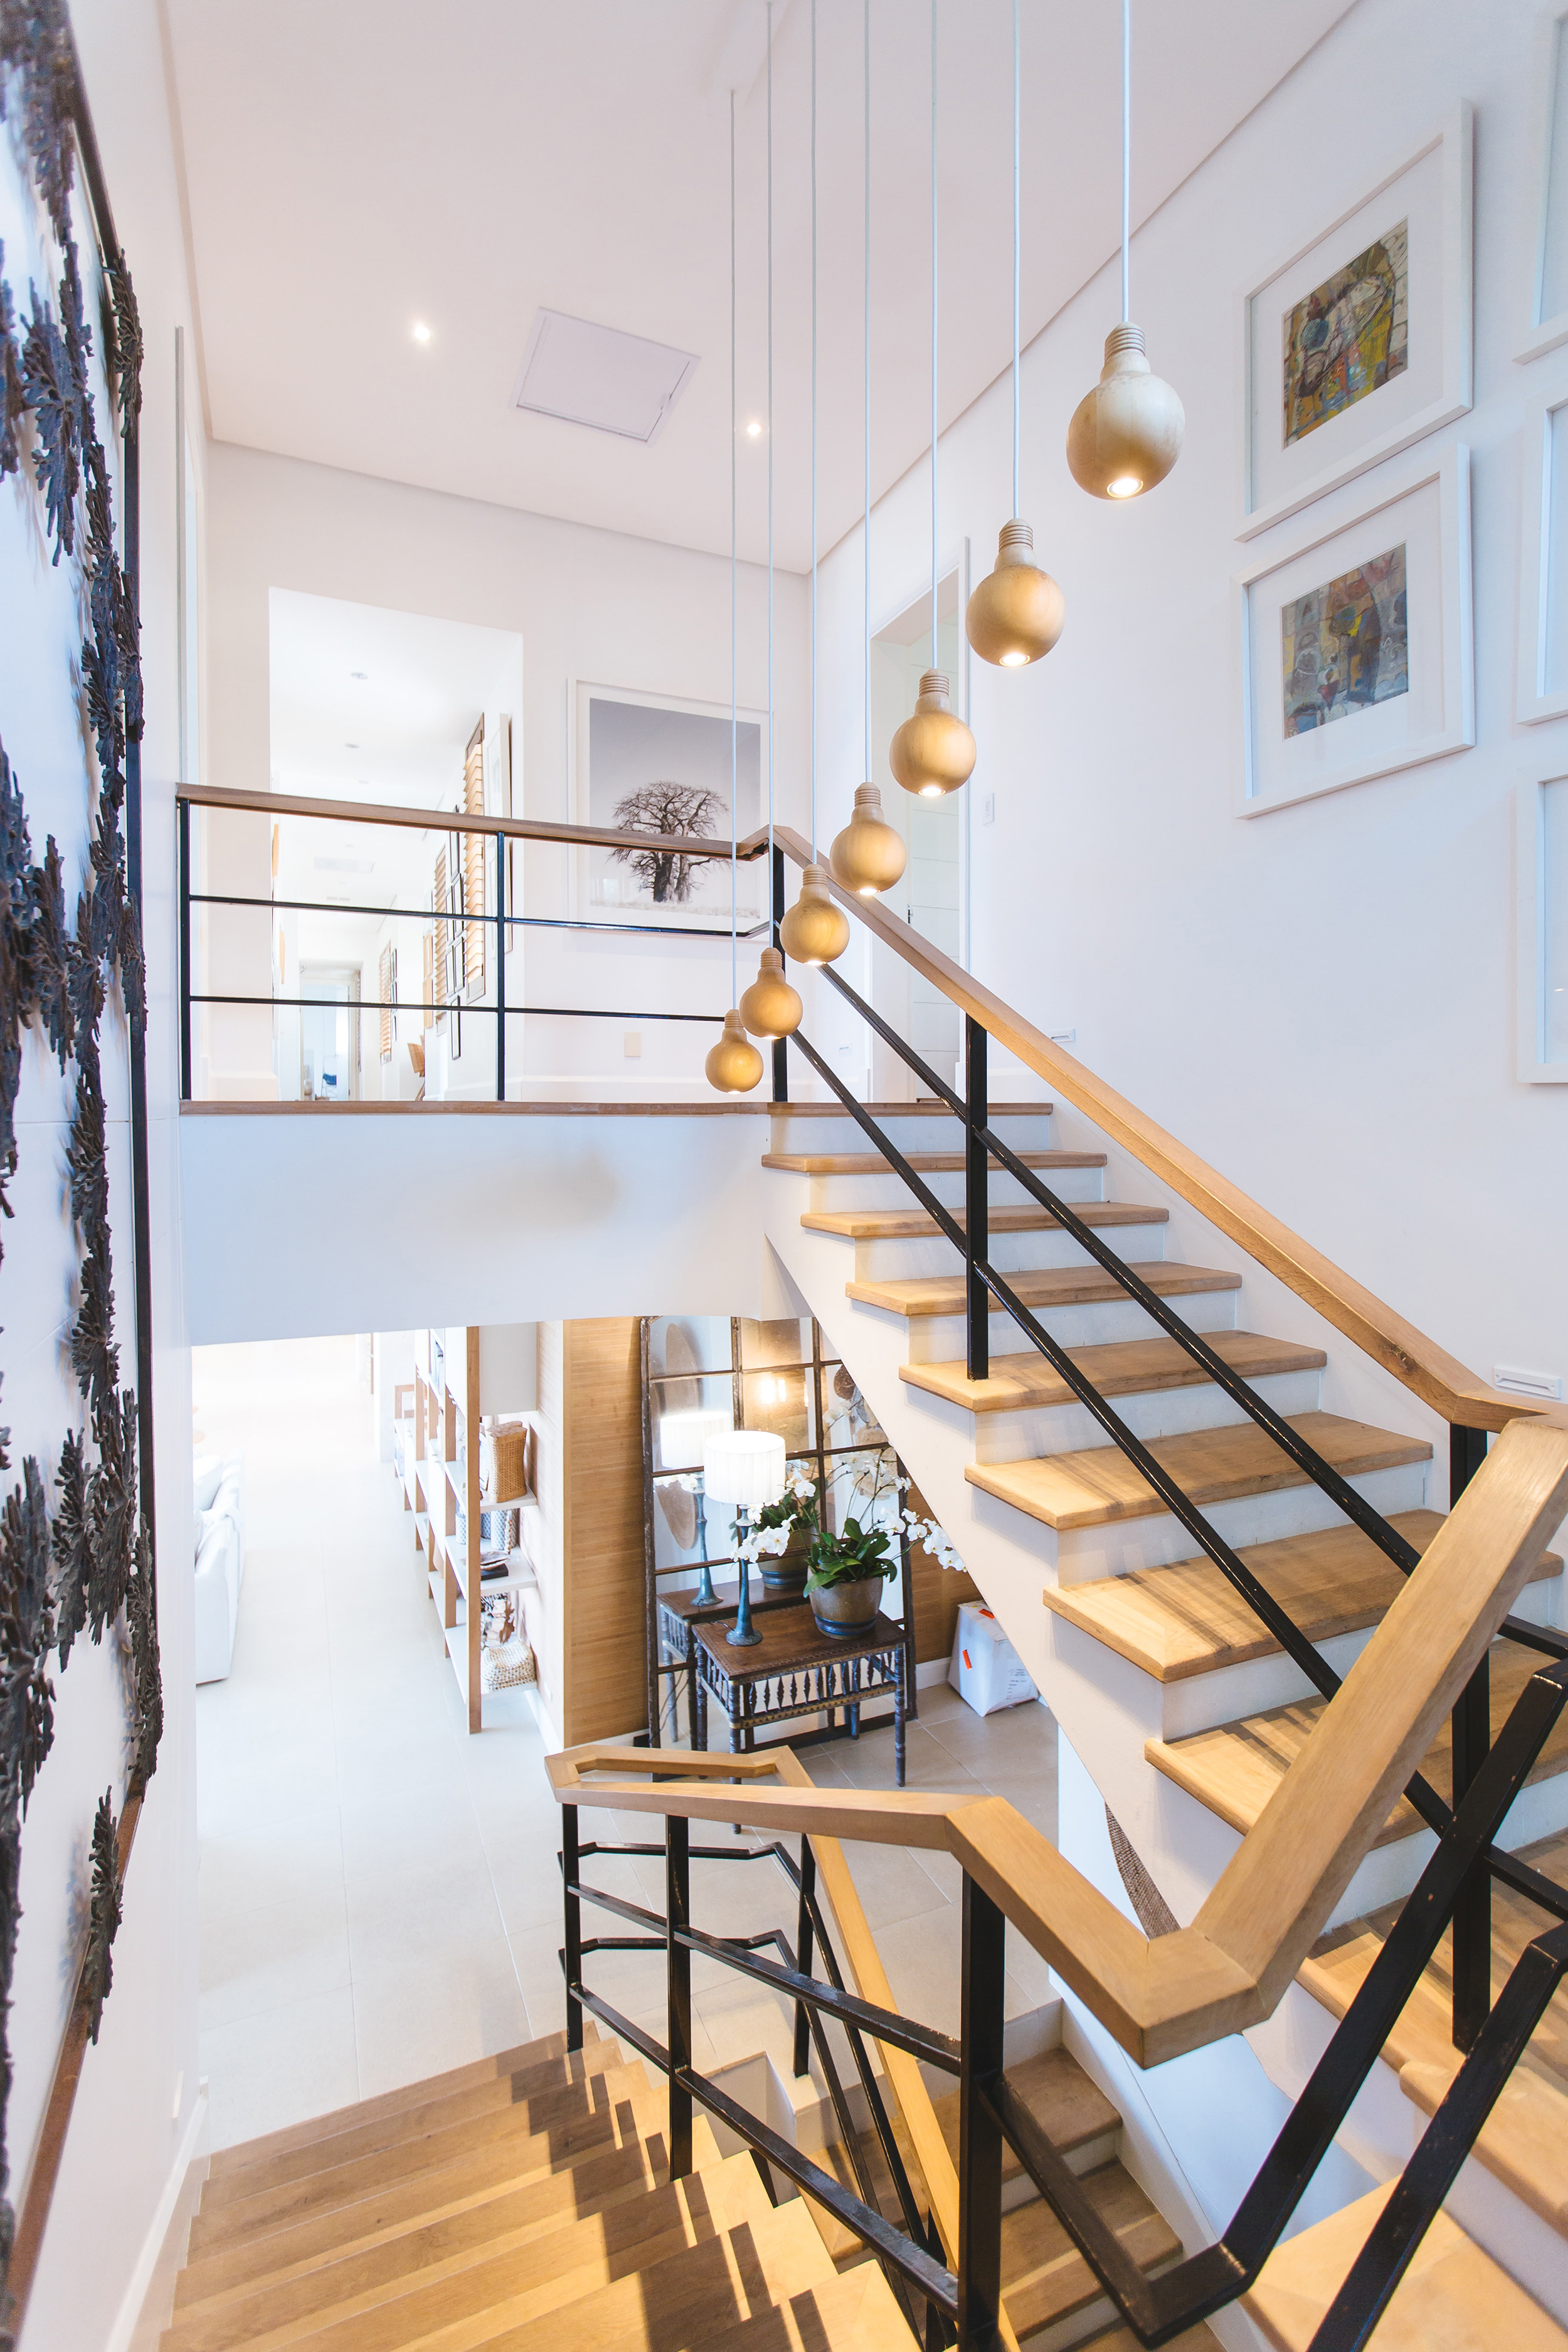 Modern wooden stairwell with pictures on the walls & lovely lighting.